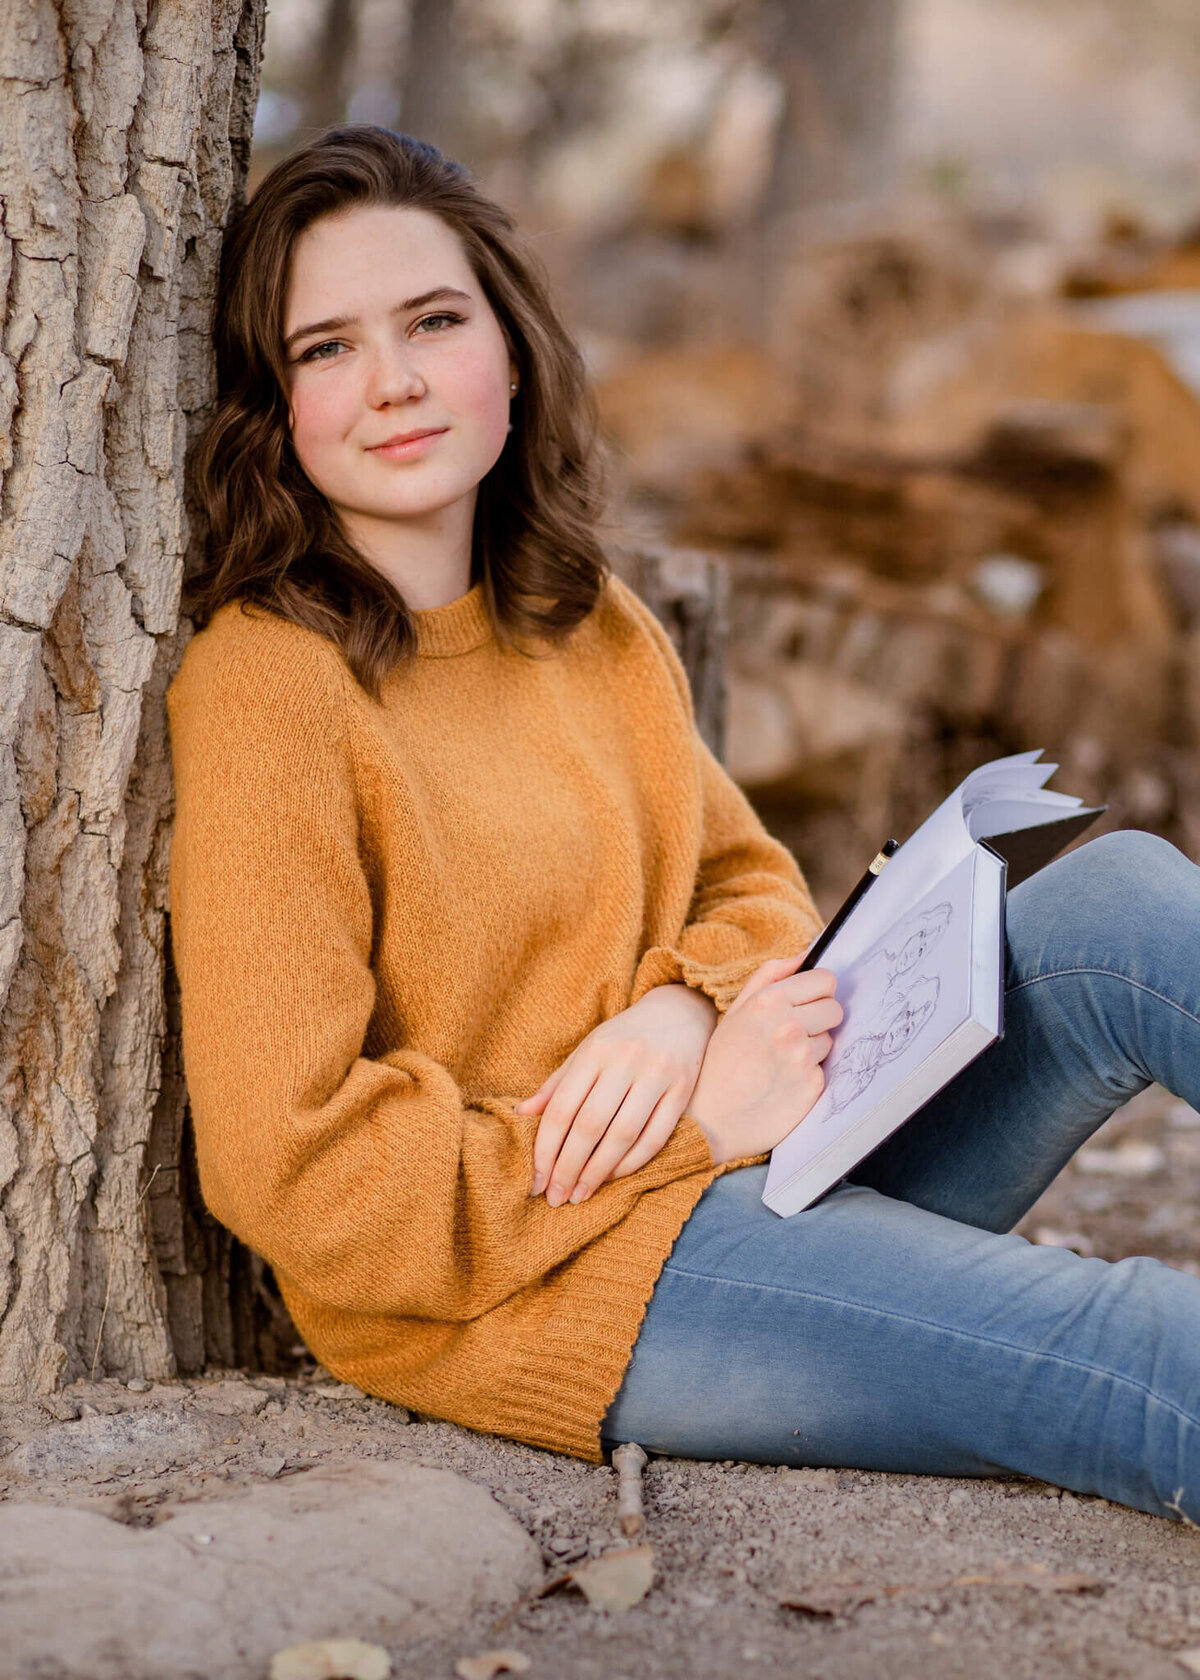 teenage girl sitting leaning against a tree holding her sketch book and pencil